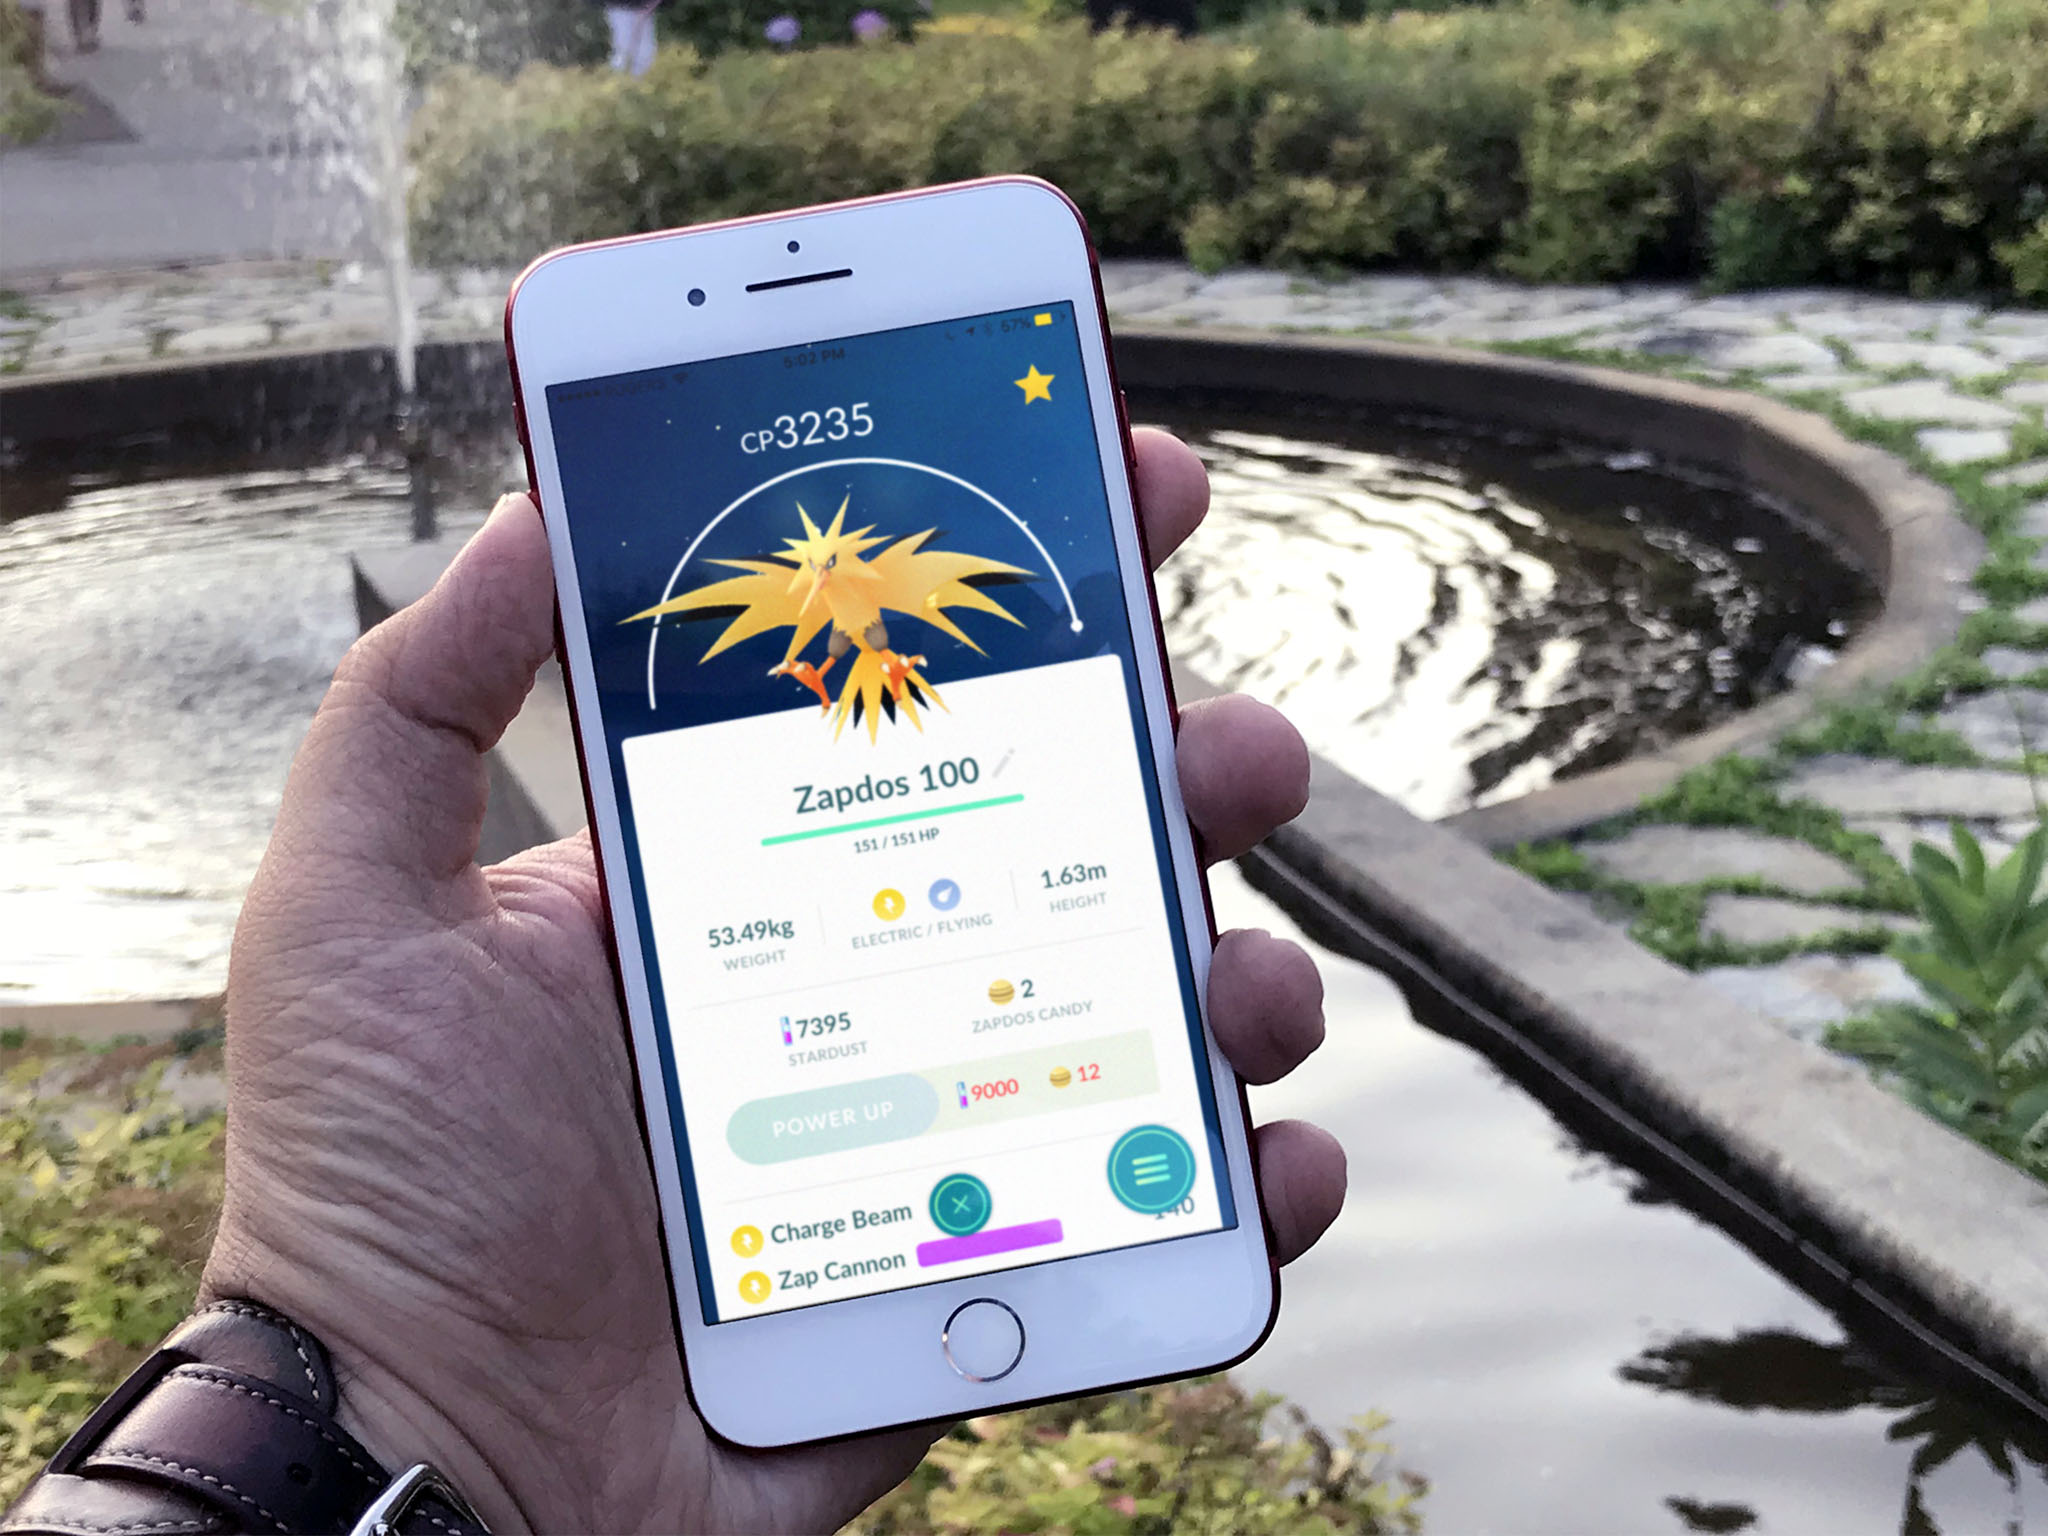 Best Pokémon Go movesets for Mewtwo, Zapdos, Moltres, Articuno